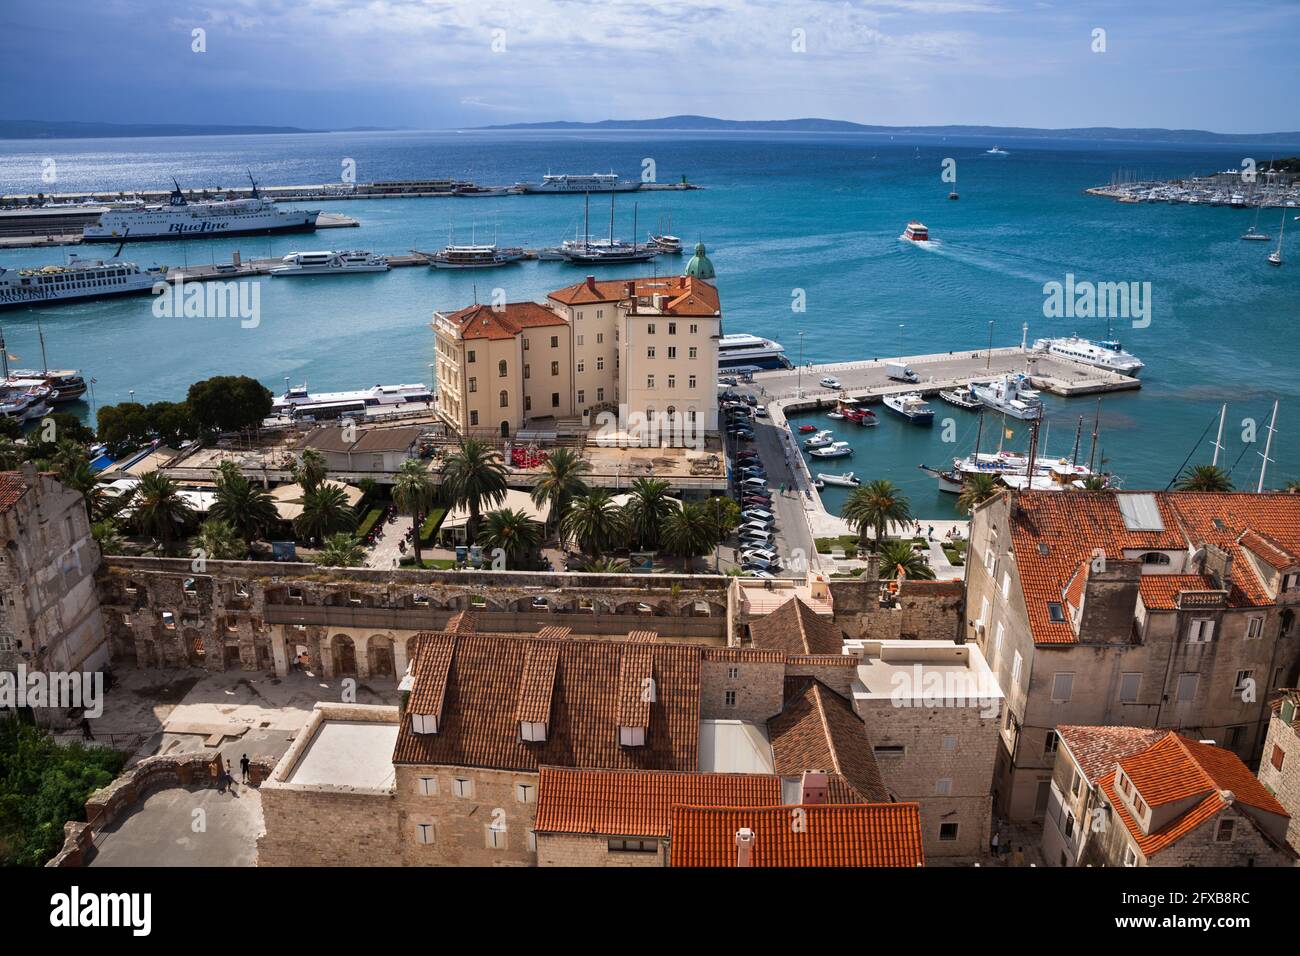 The waterfront of the City of Split as seen from atop the bell tower of the Cathedral of Saint Domnius in the Diocletian Palace in old town. Croatia Stock Photo